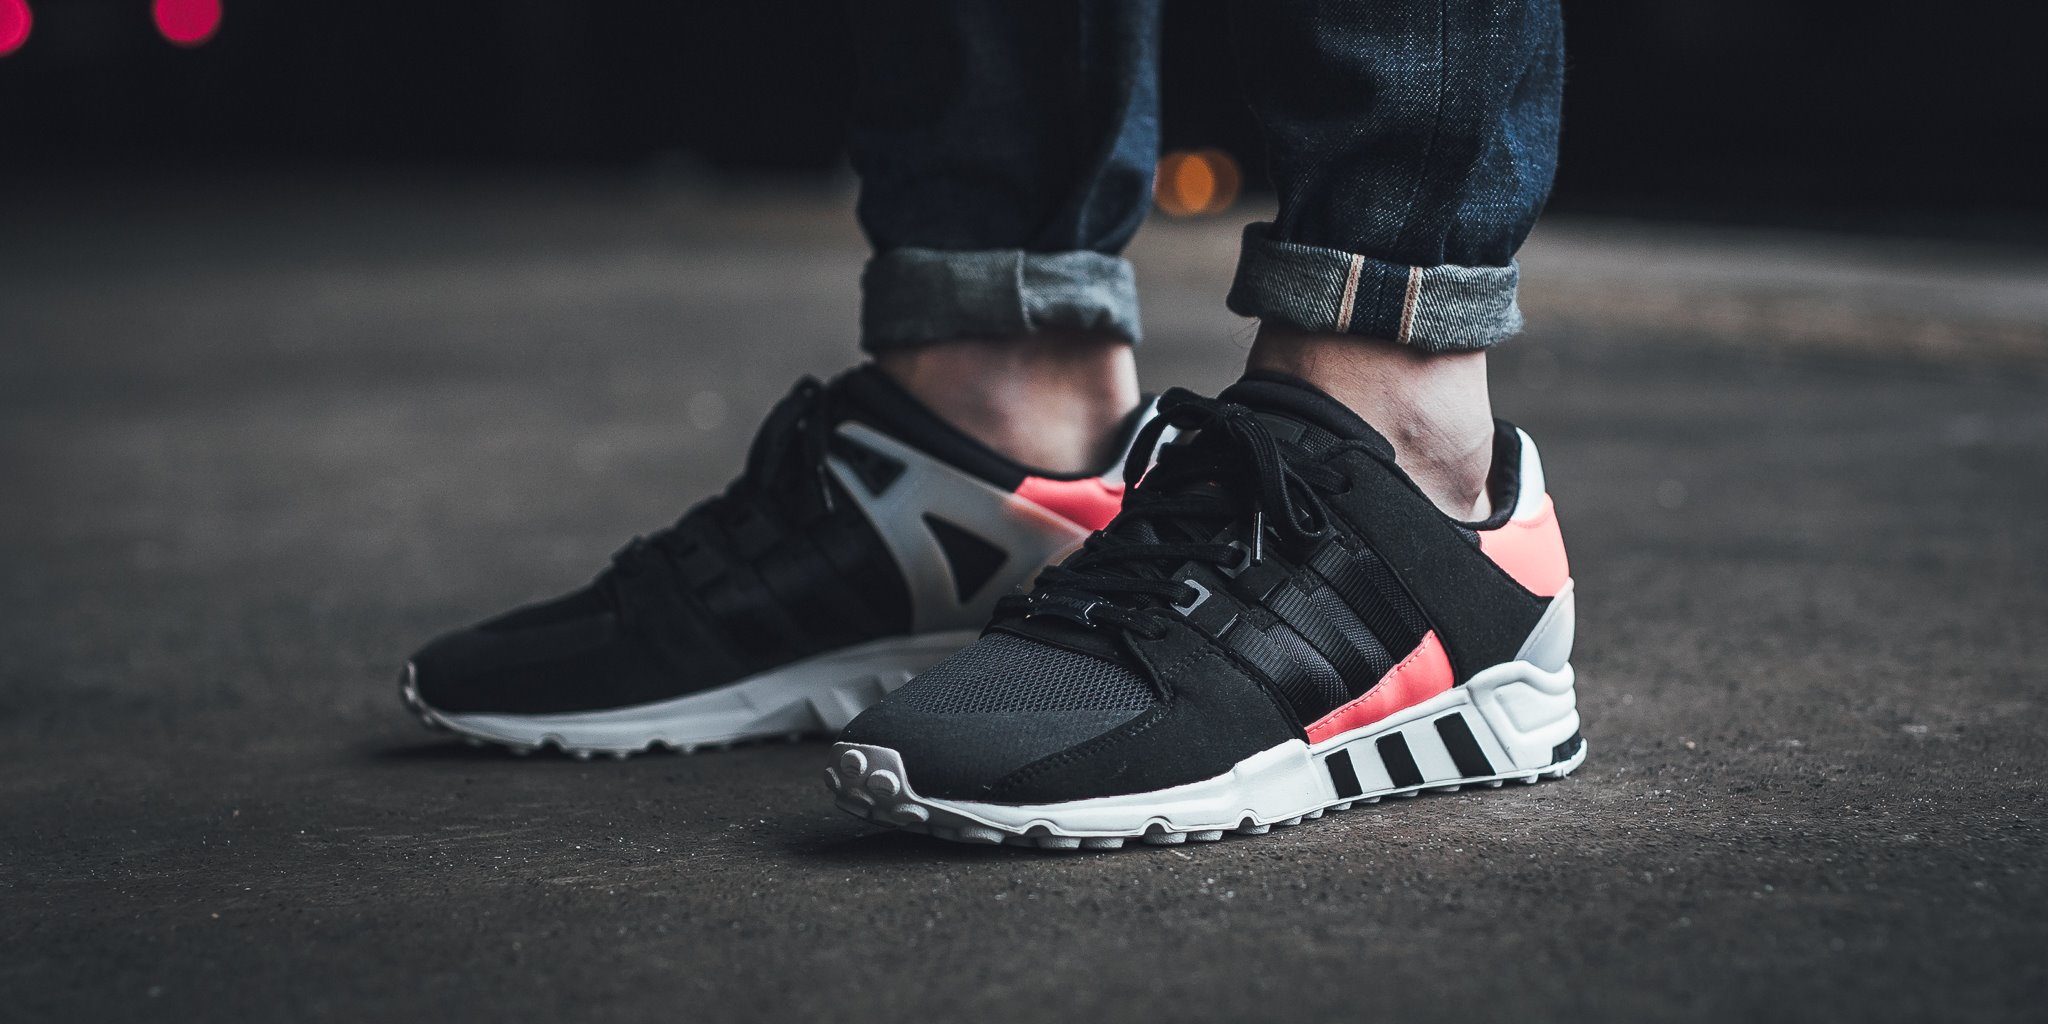 adidas eqt support sneakers